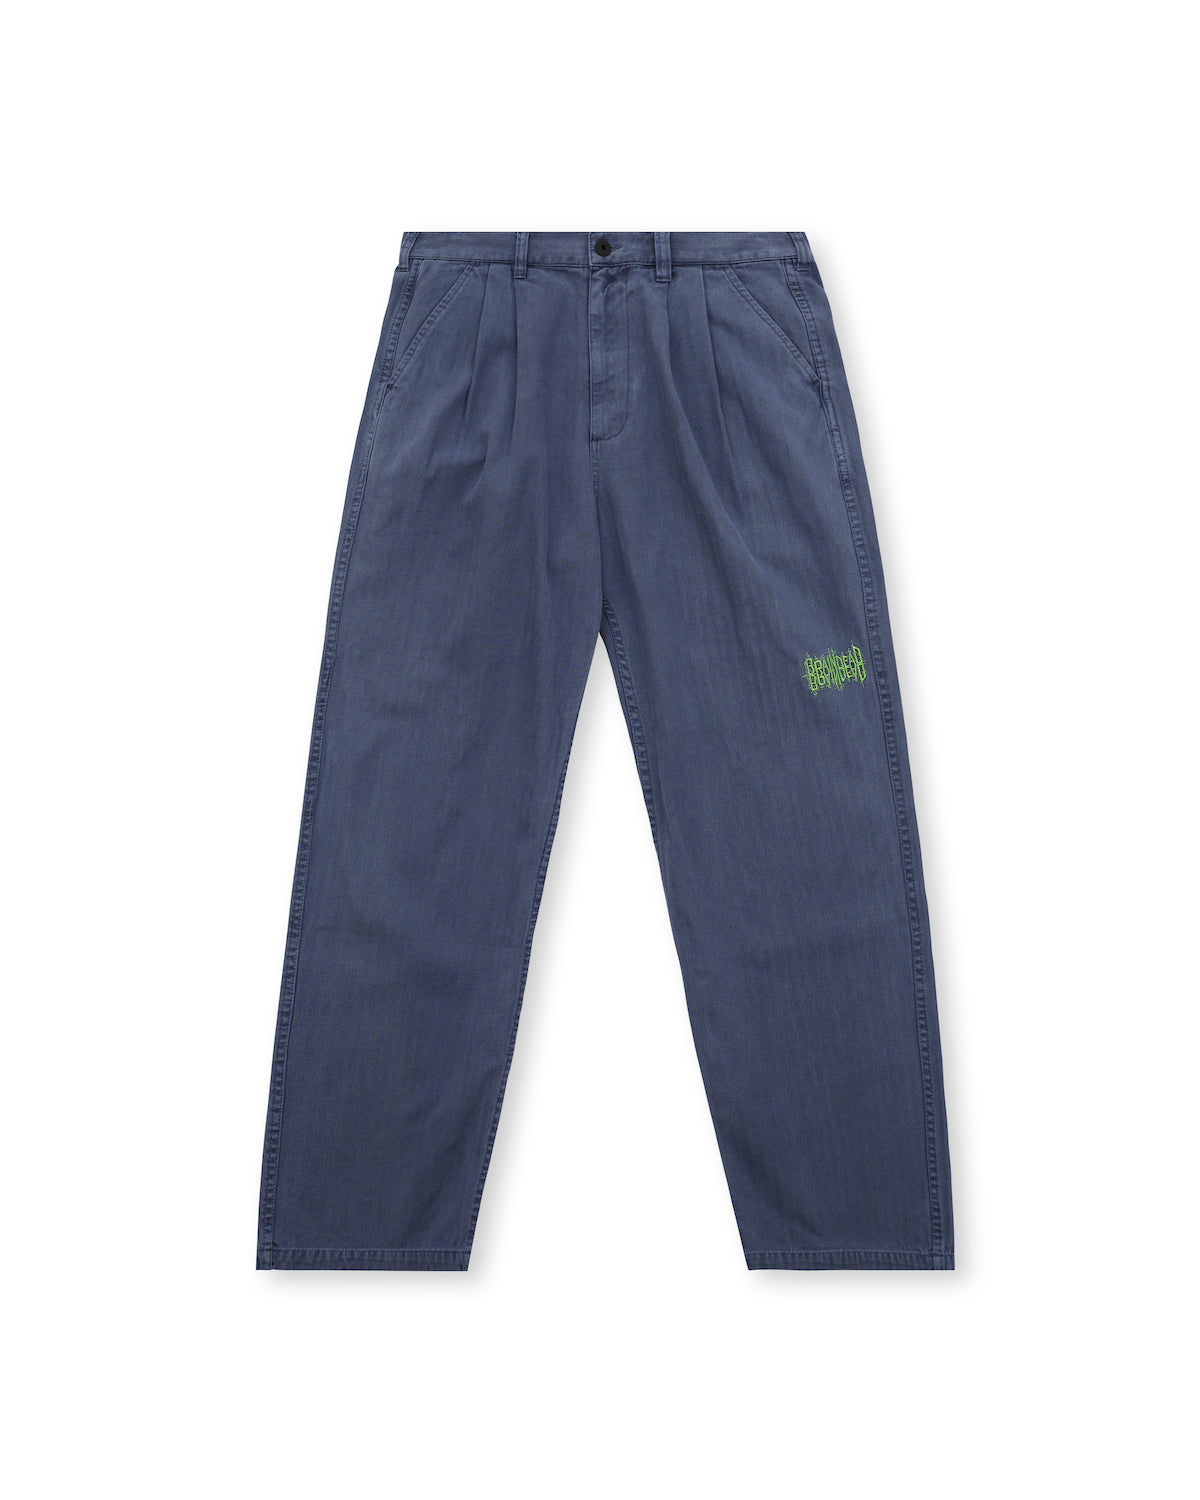 Livewire Pigment Dyed Herringbone Pant - Washed Navy 1